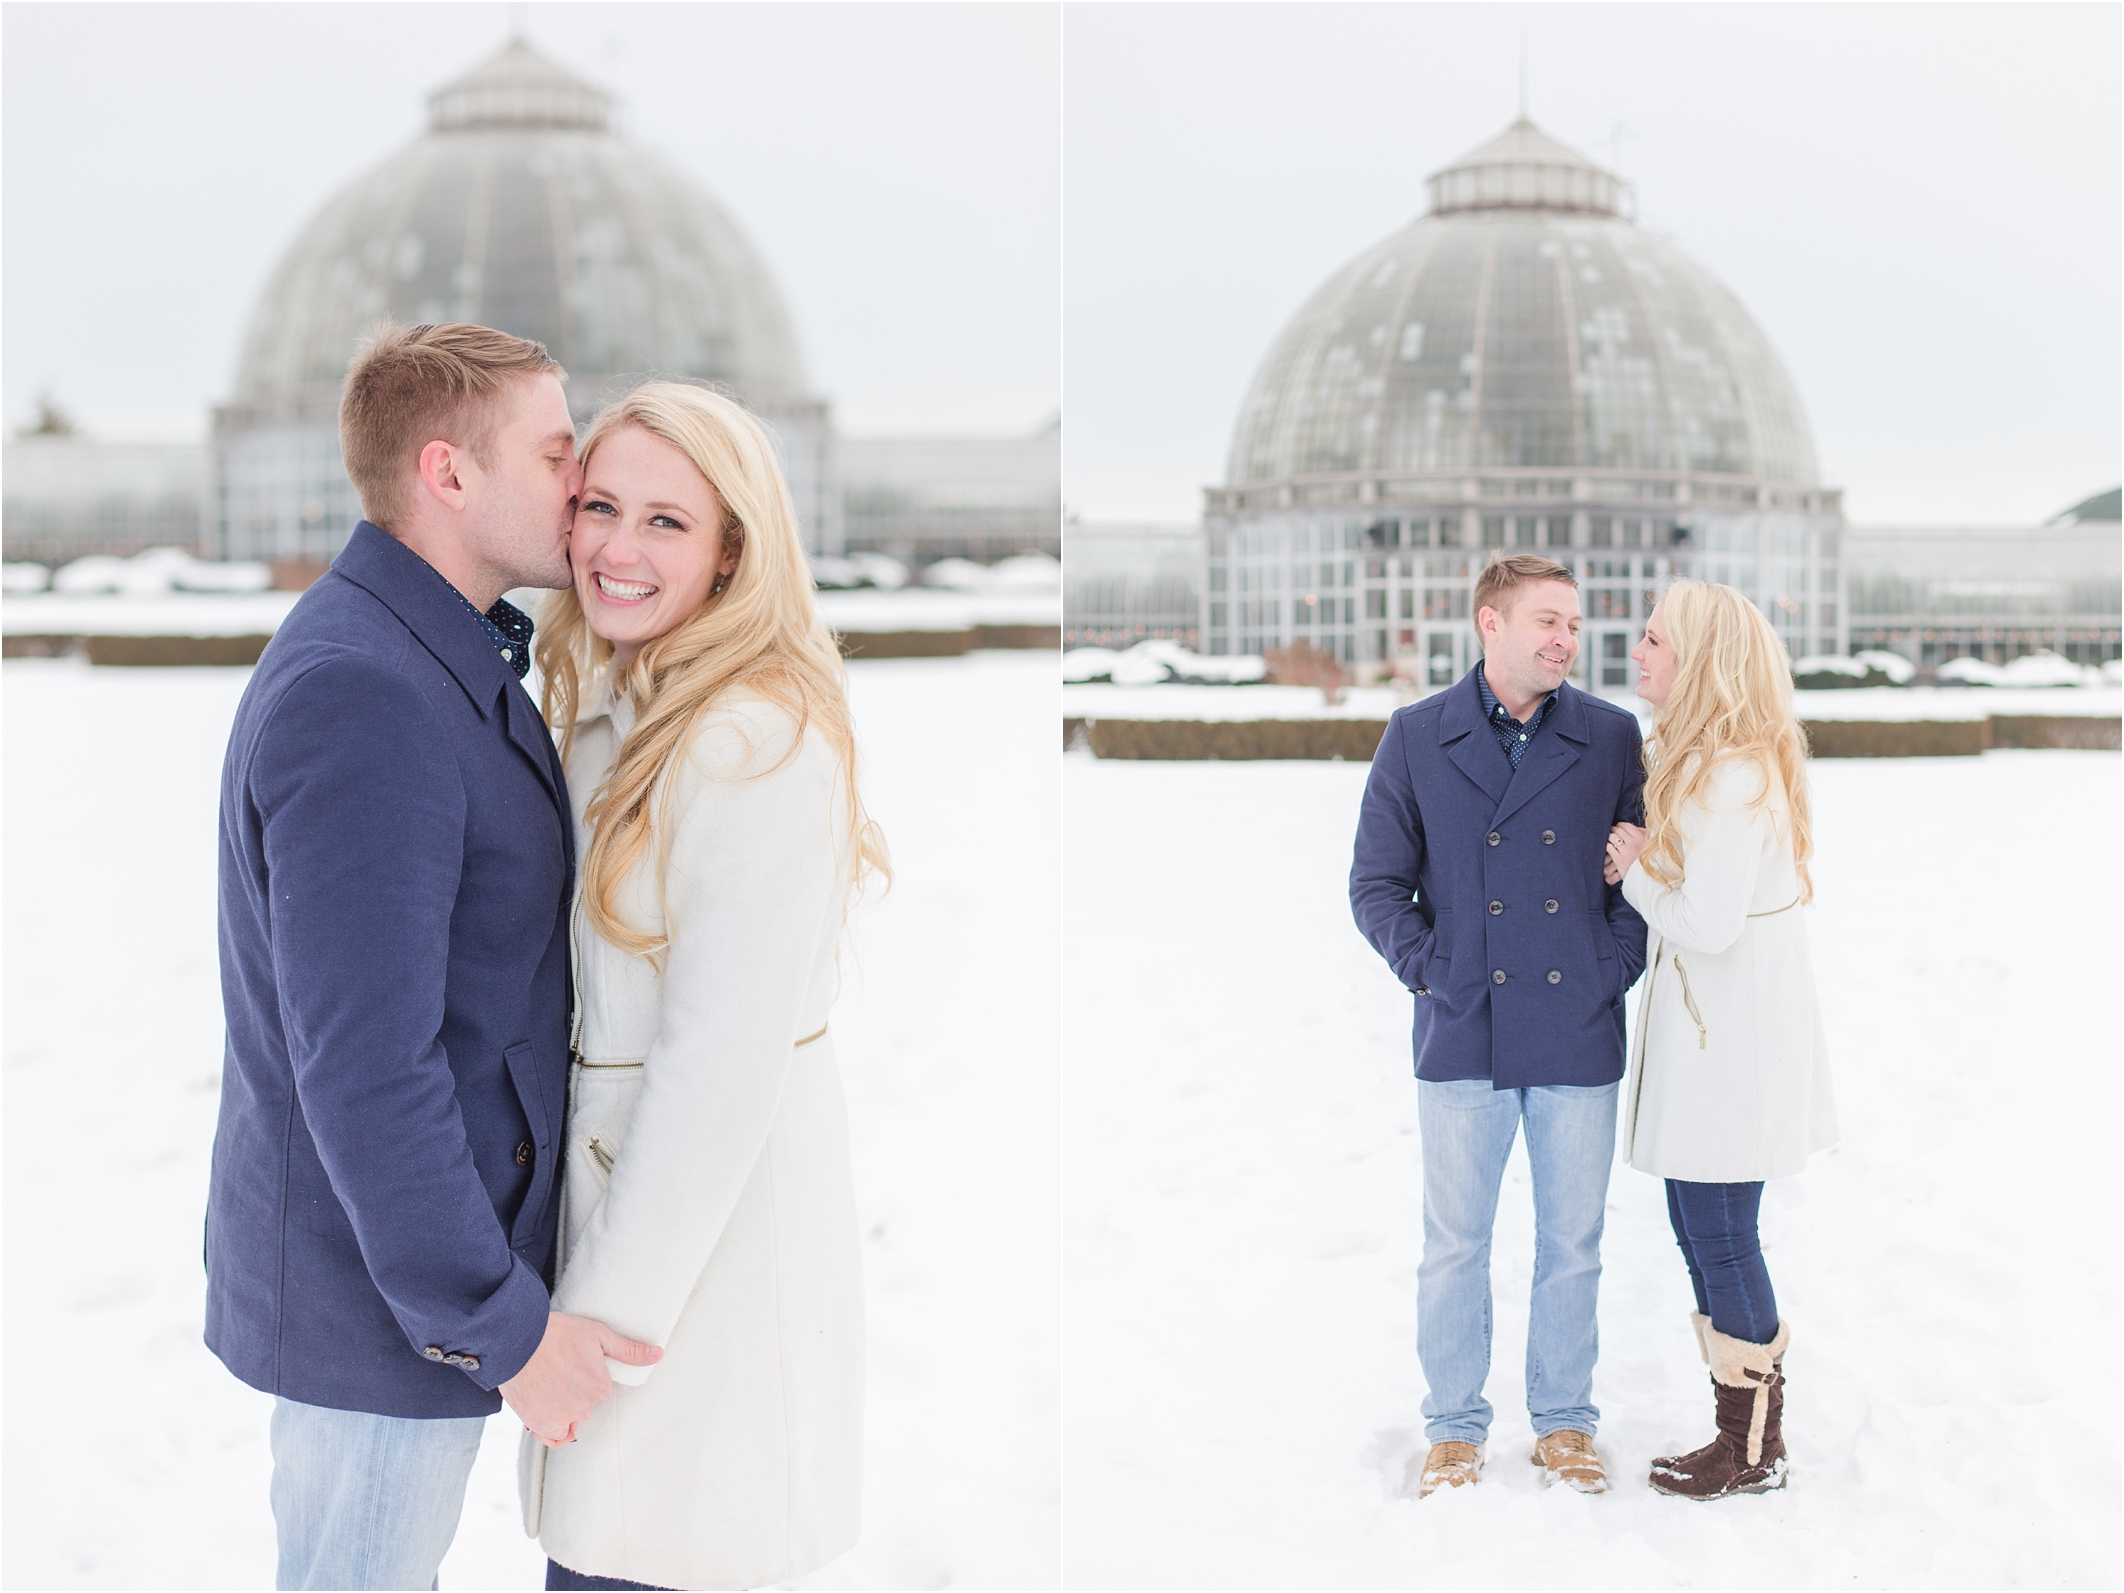 elegant-classic-belle-isle-conservatory-engagement-photos-in-detroit-mi-by-courtney-carolyn-photography_0033.jpg